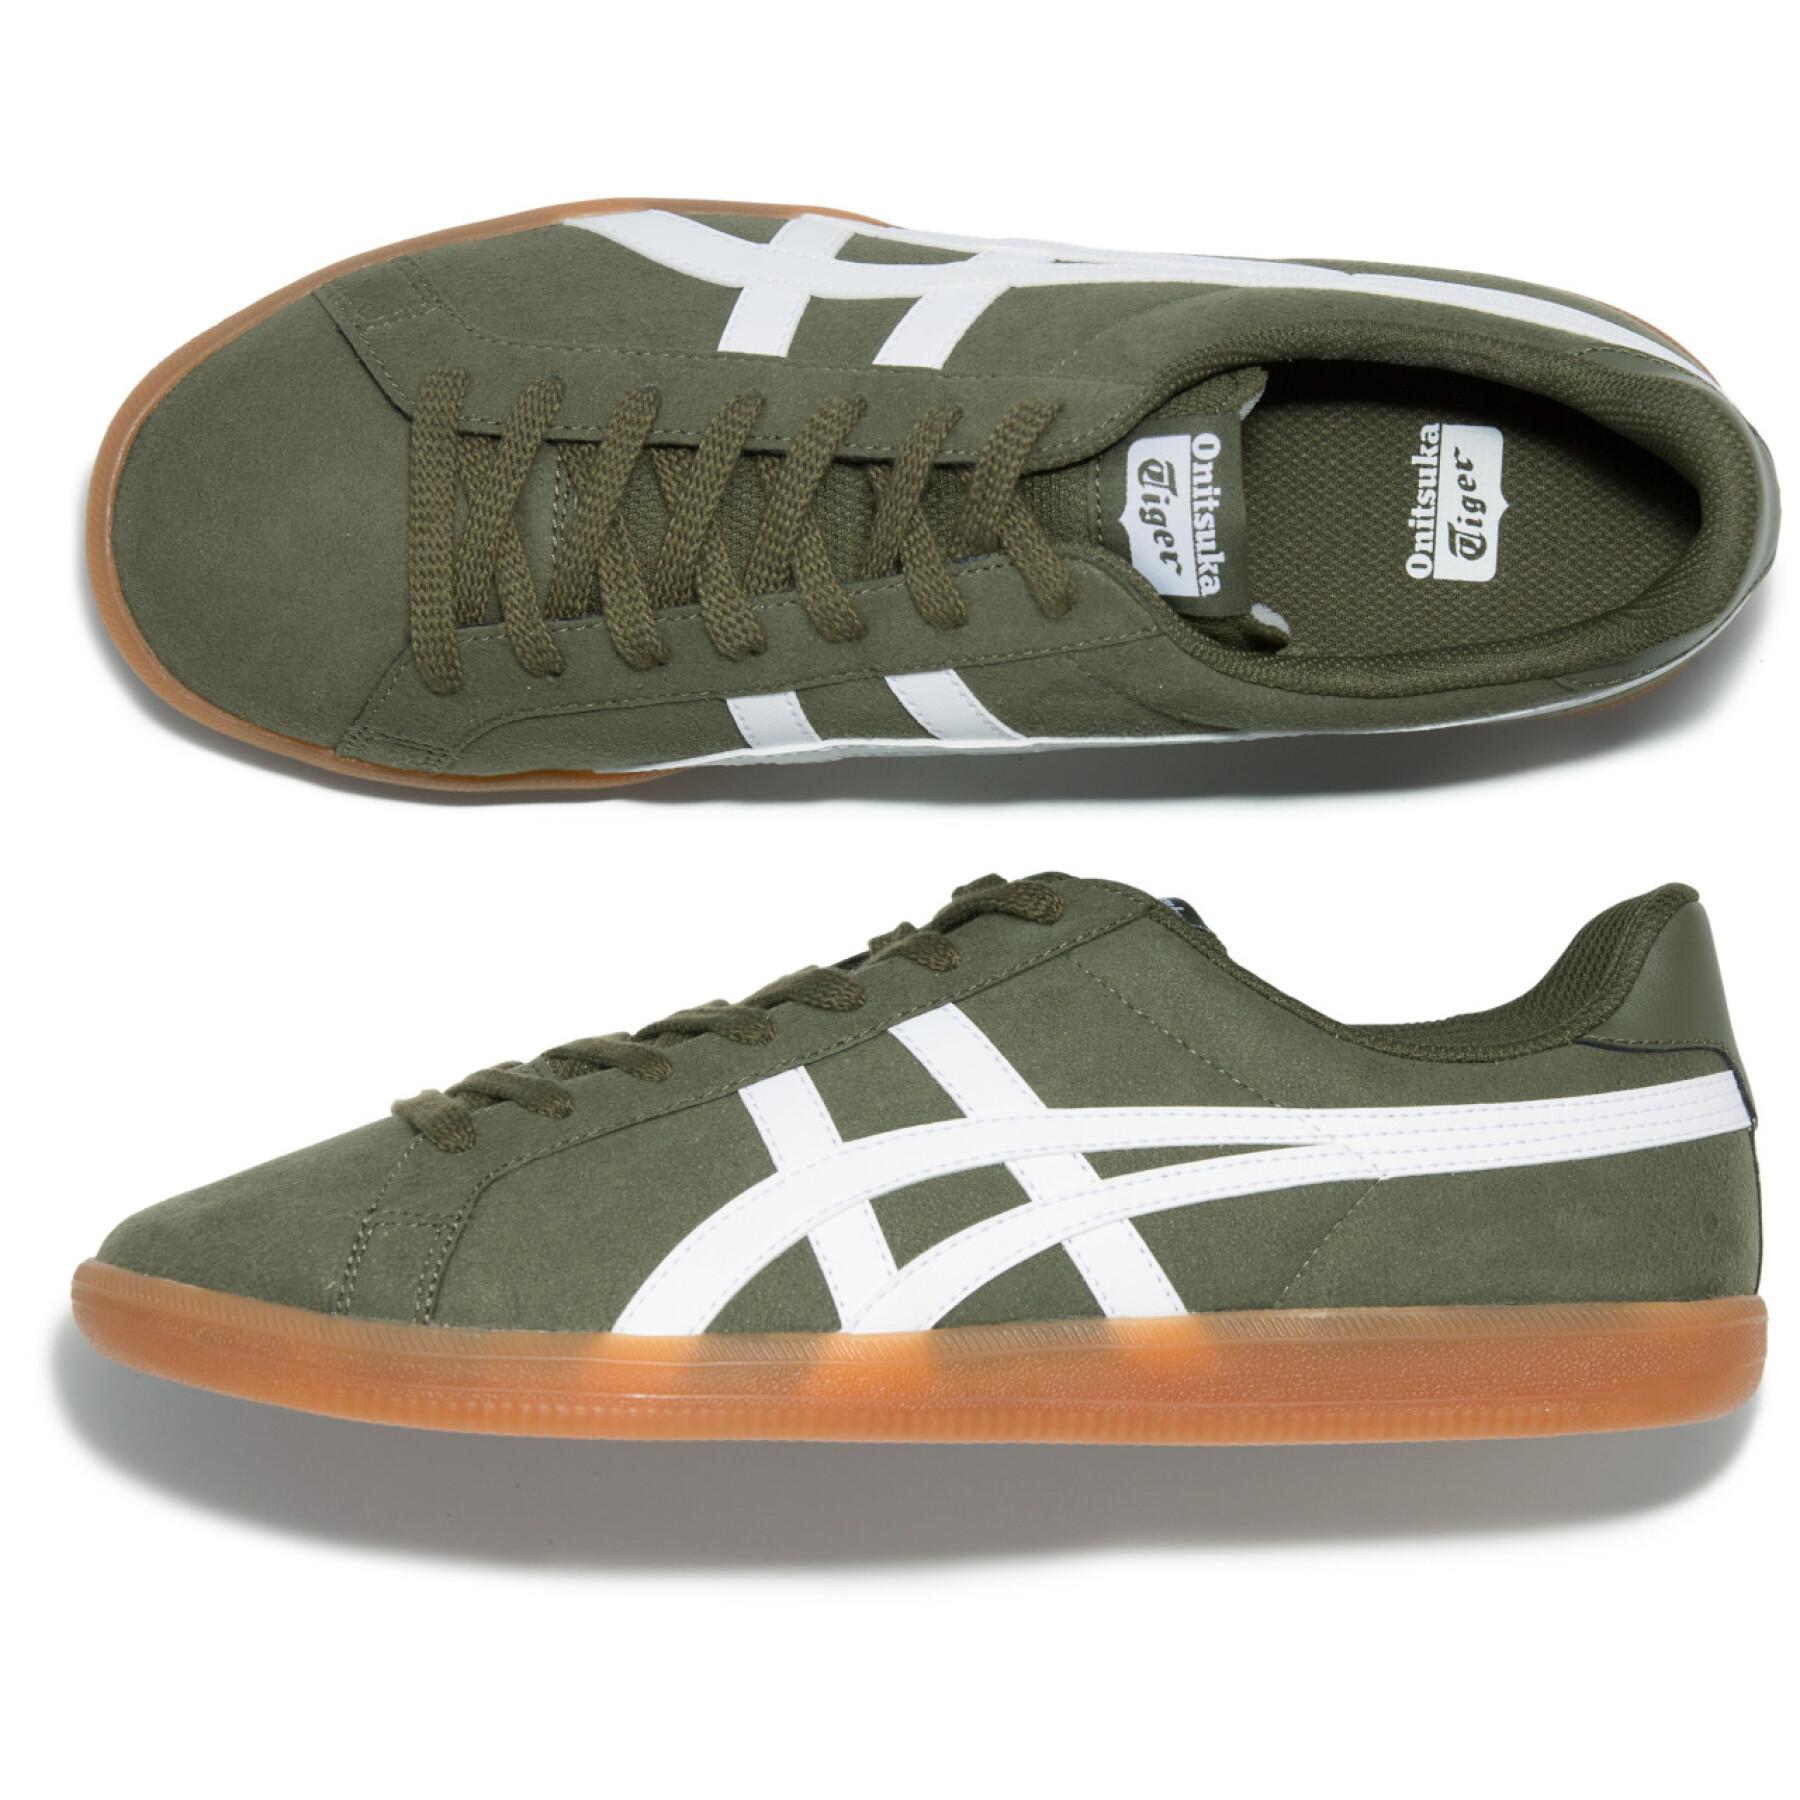 Sneakers Onitsuka Tiger Dd Trainer